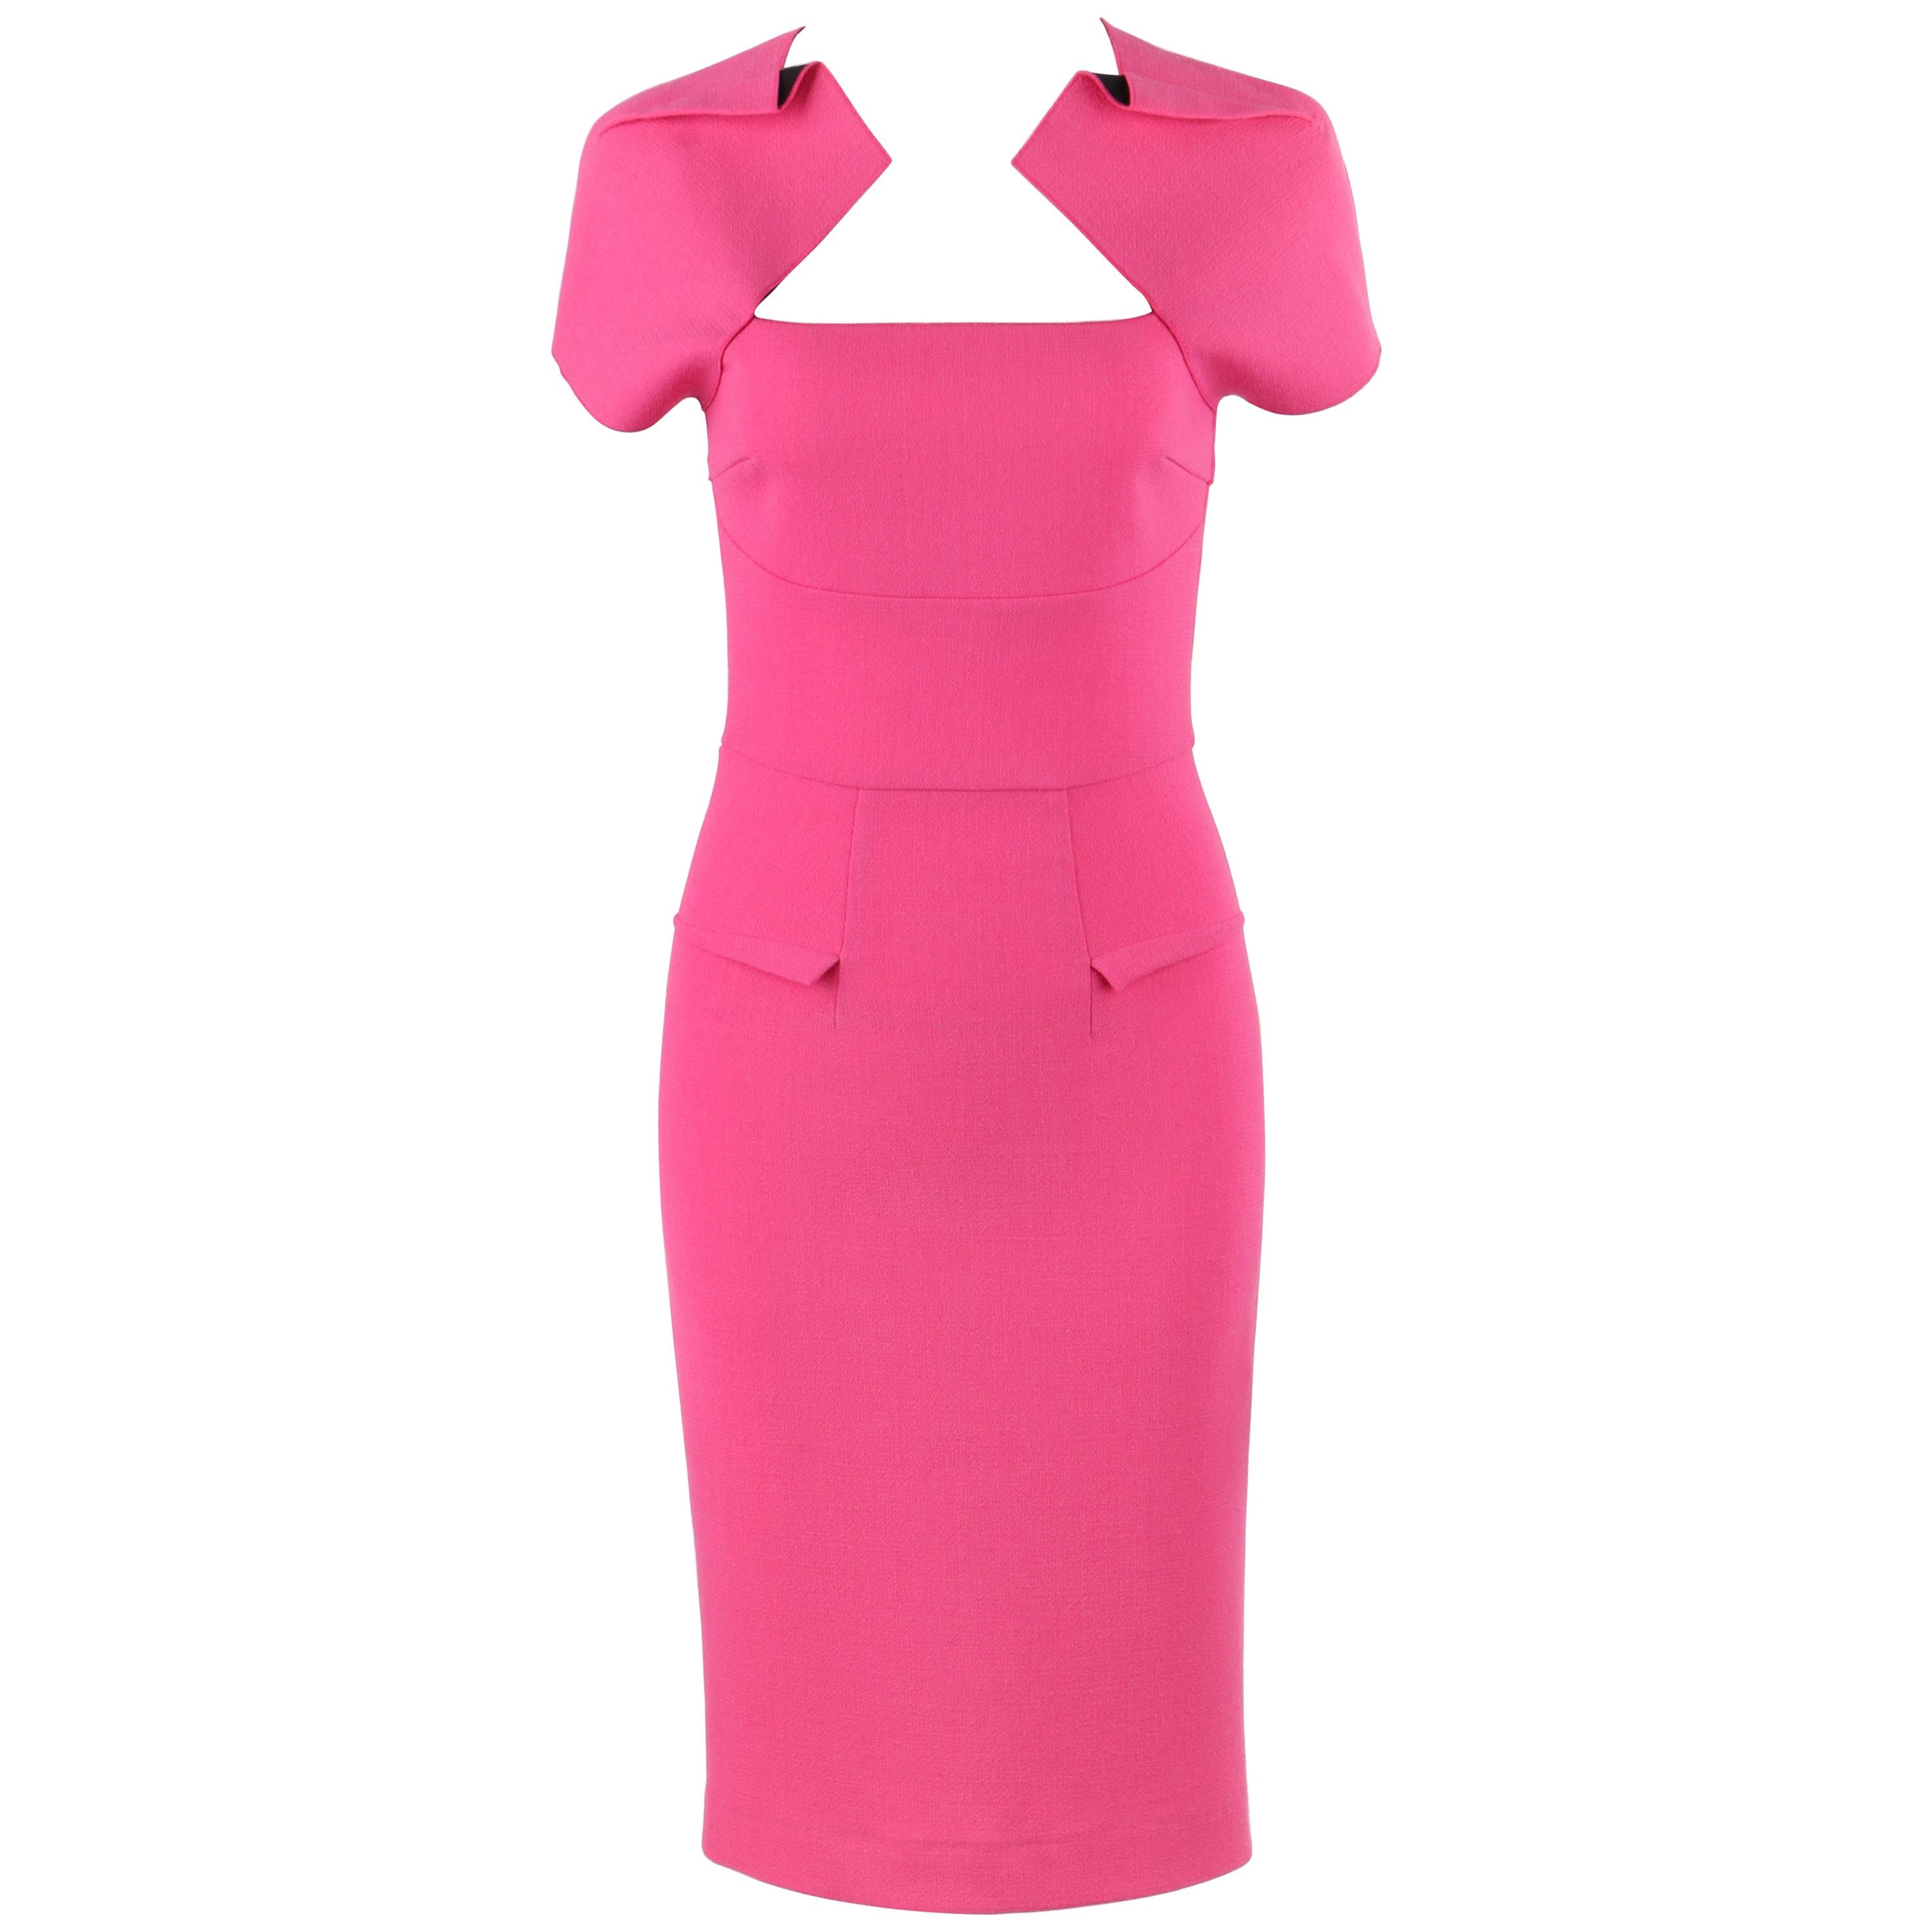  ROLAND MOURET Neiman Marcus Pink “Myrtha” Wool Crepe Fitted Sheath Dress NWT